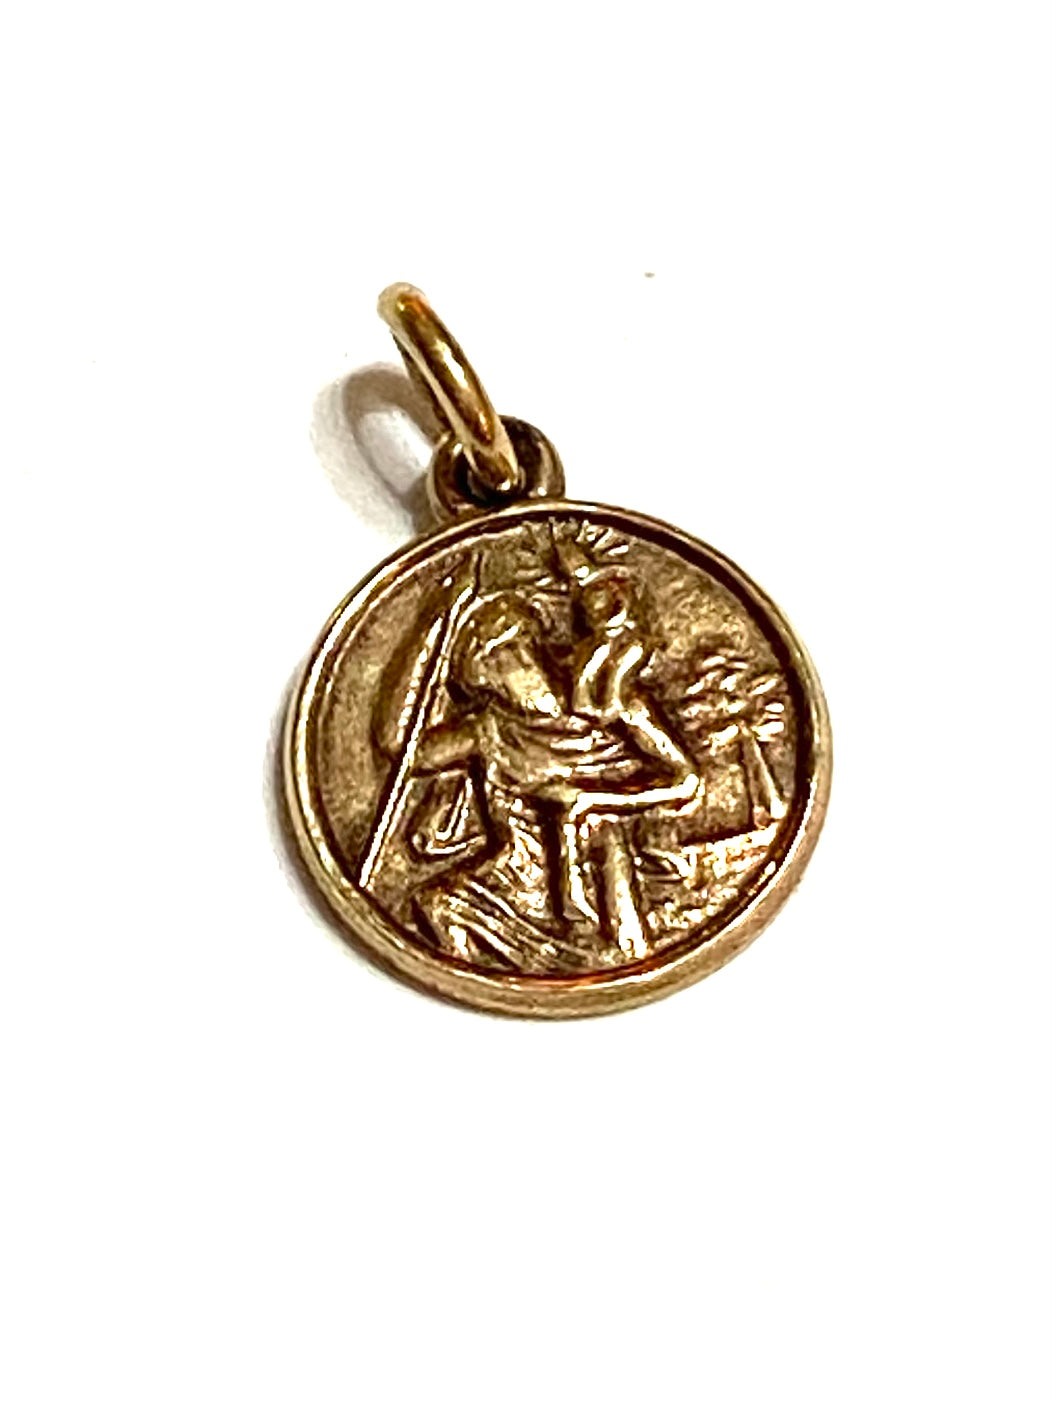 9CT VINTAGE ST CHRISTOPHER CHARM VERY VERY SMALL !! CIRCA 1963